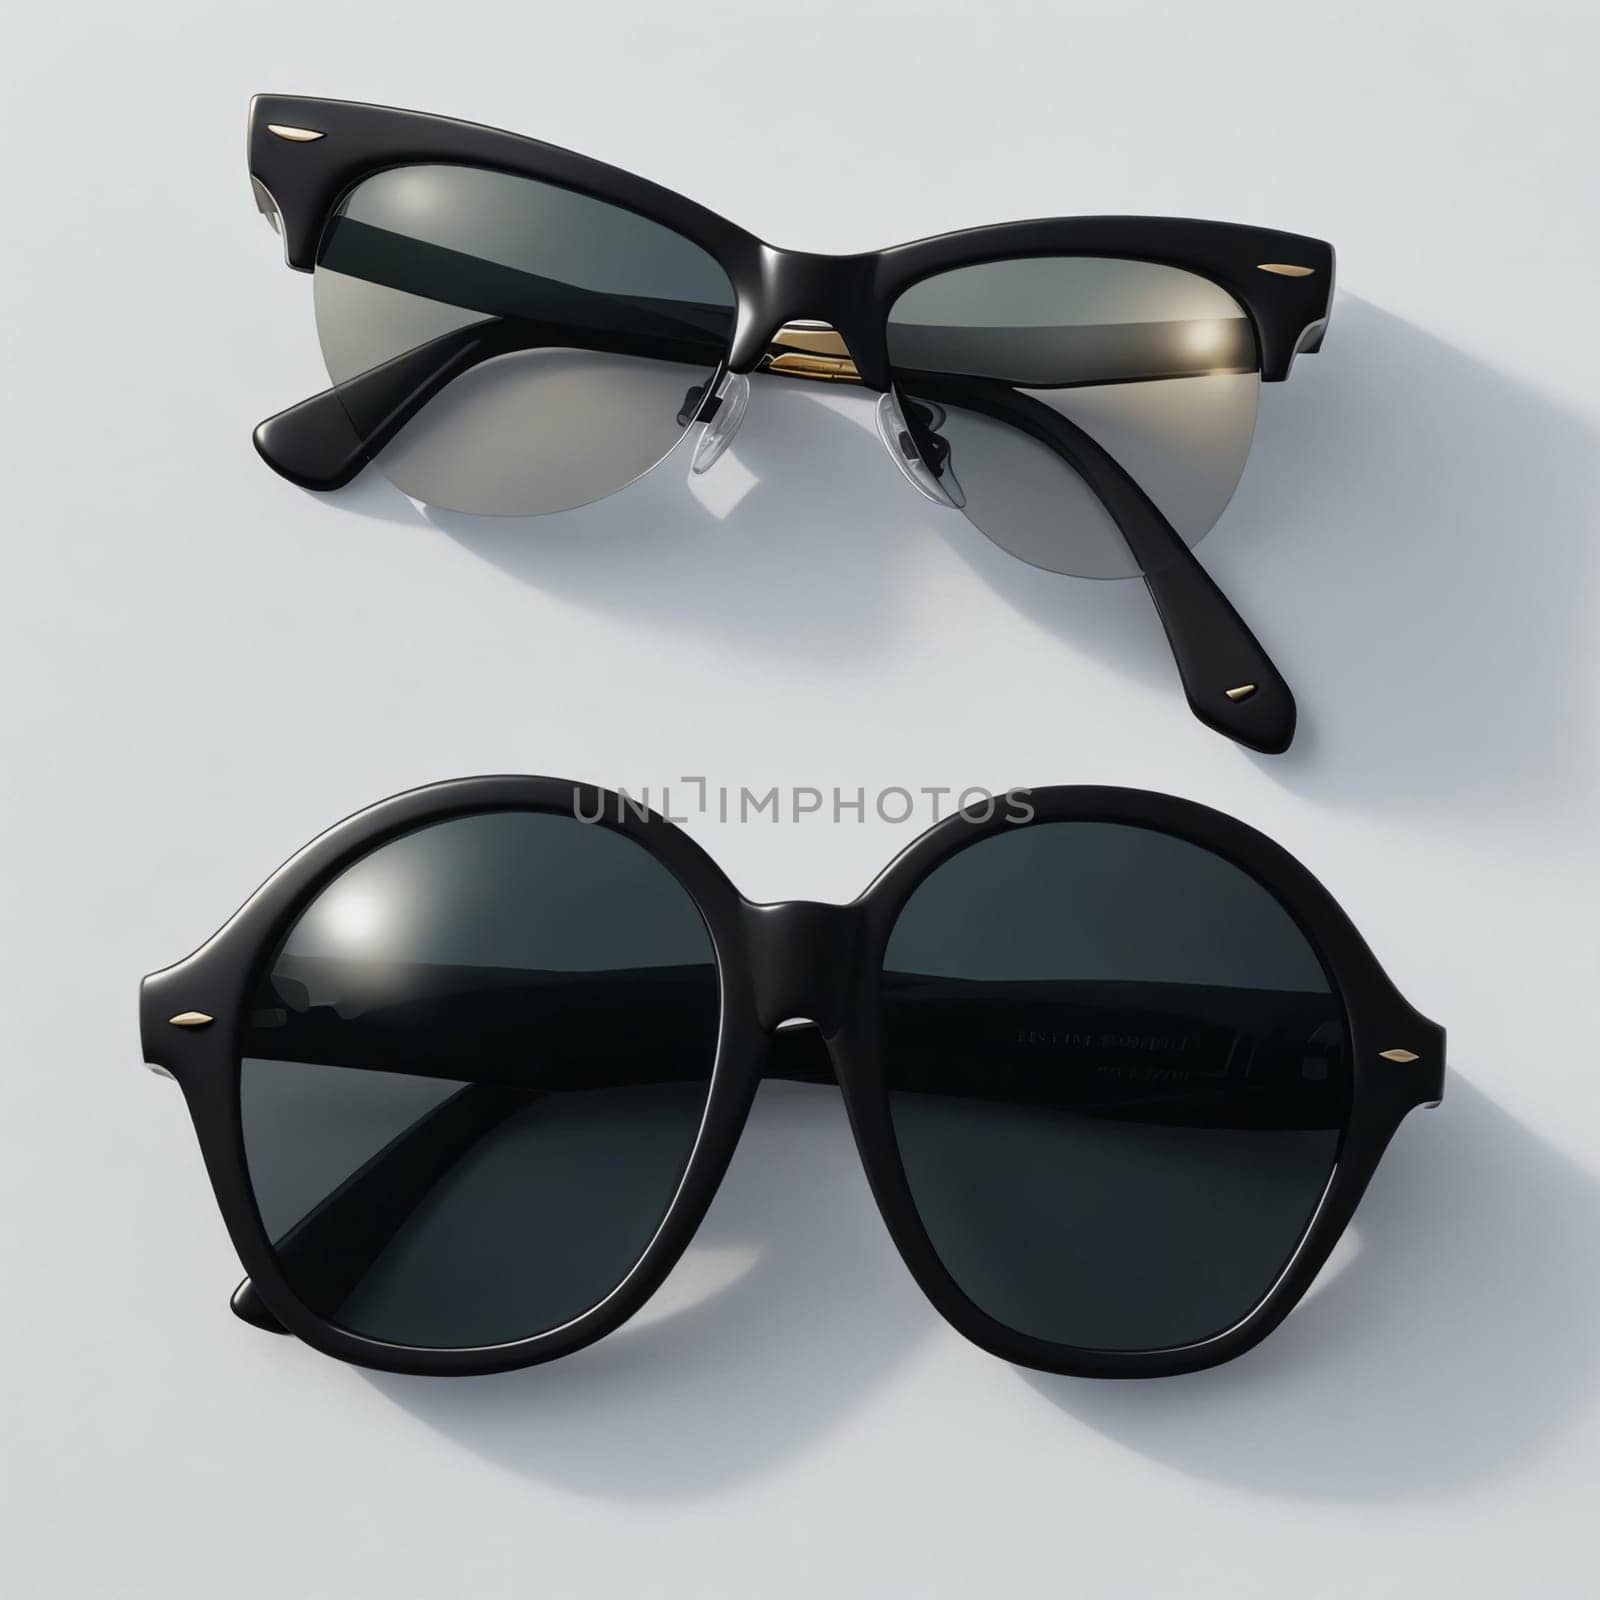 two pairs of black sunglasses on a white background by Севостьянов